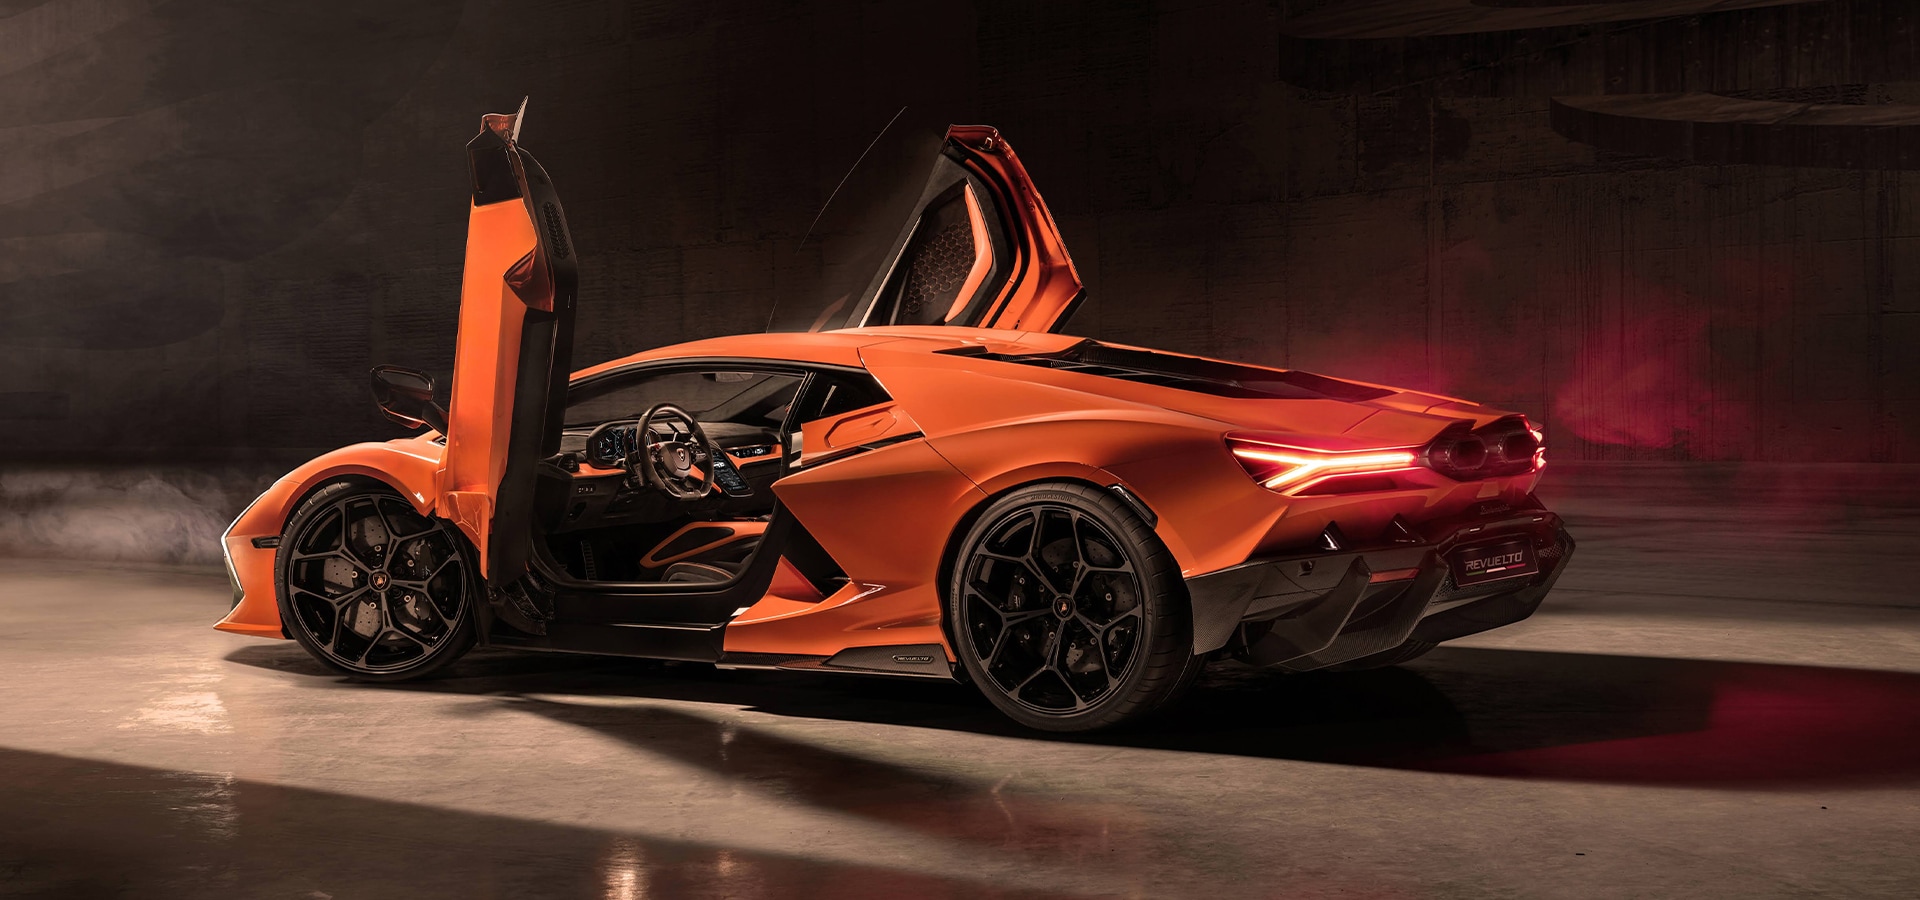 A sideview image of the Lamborghini Revuelto with its doors open